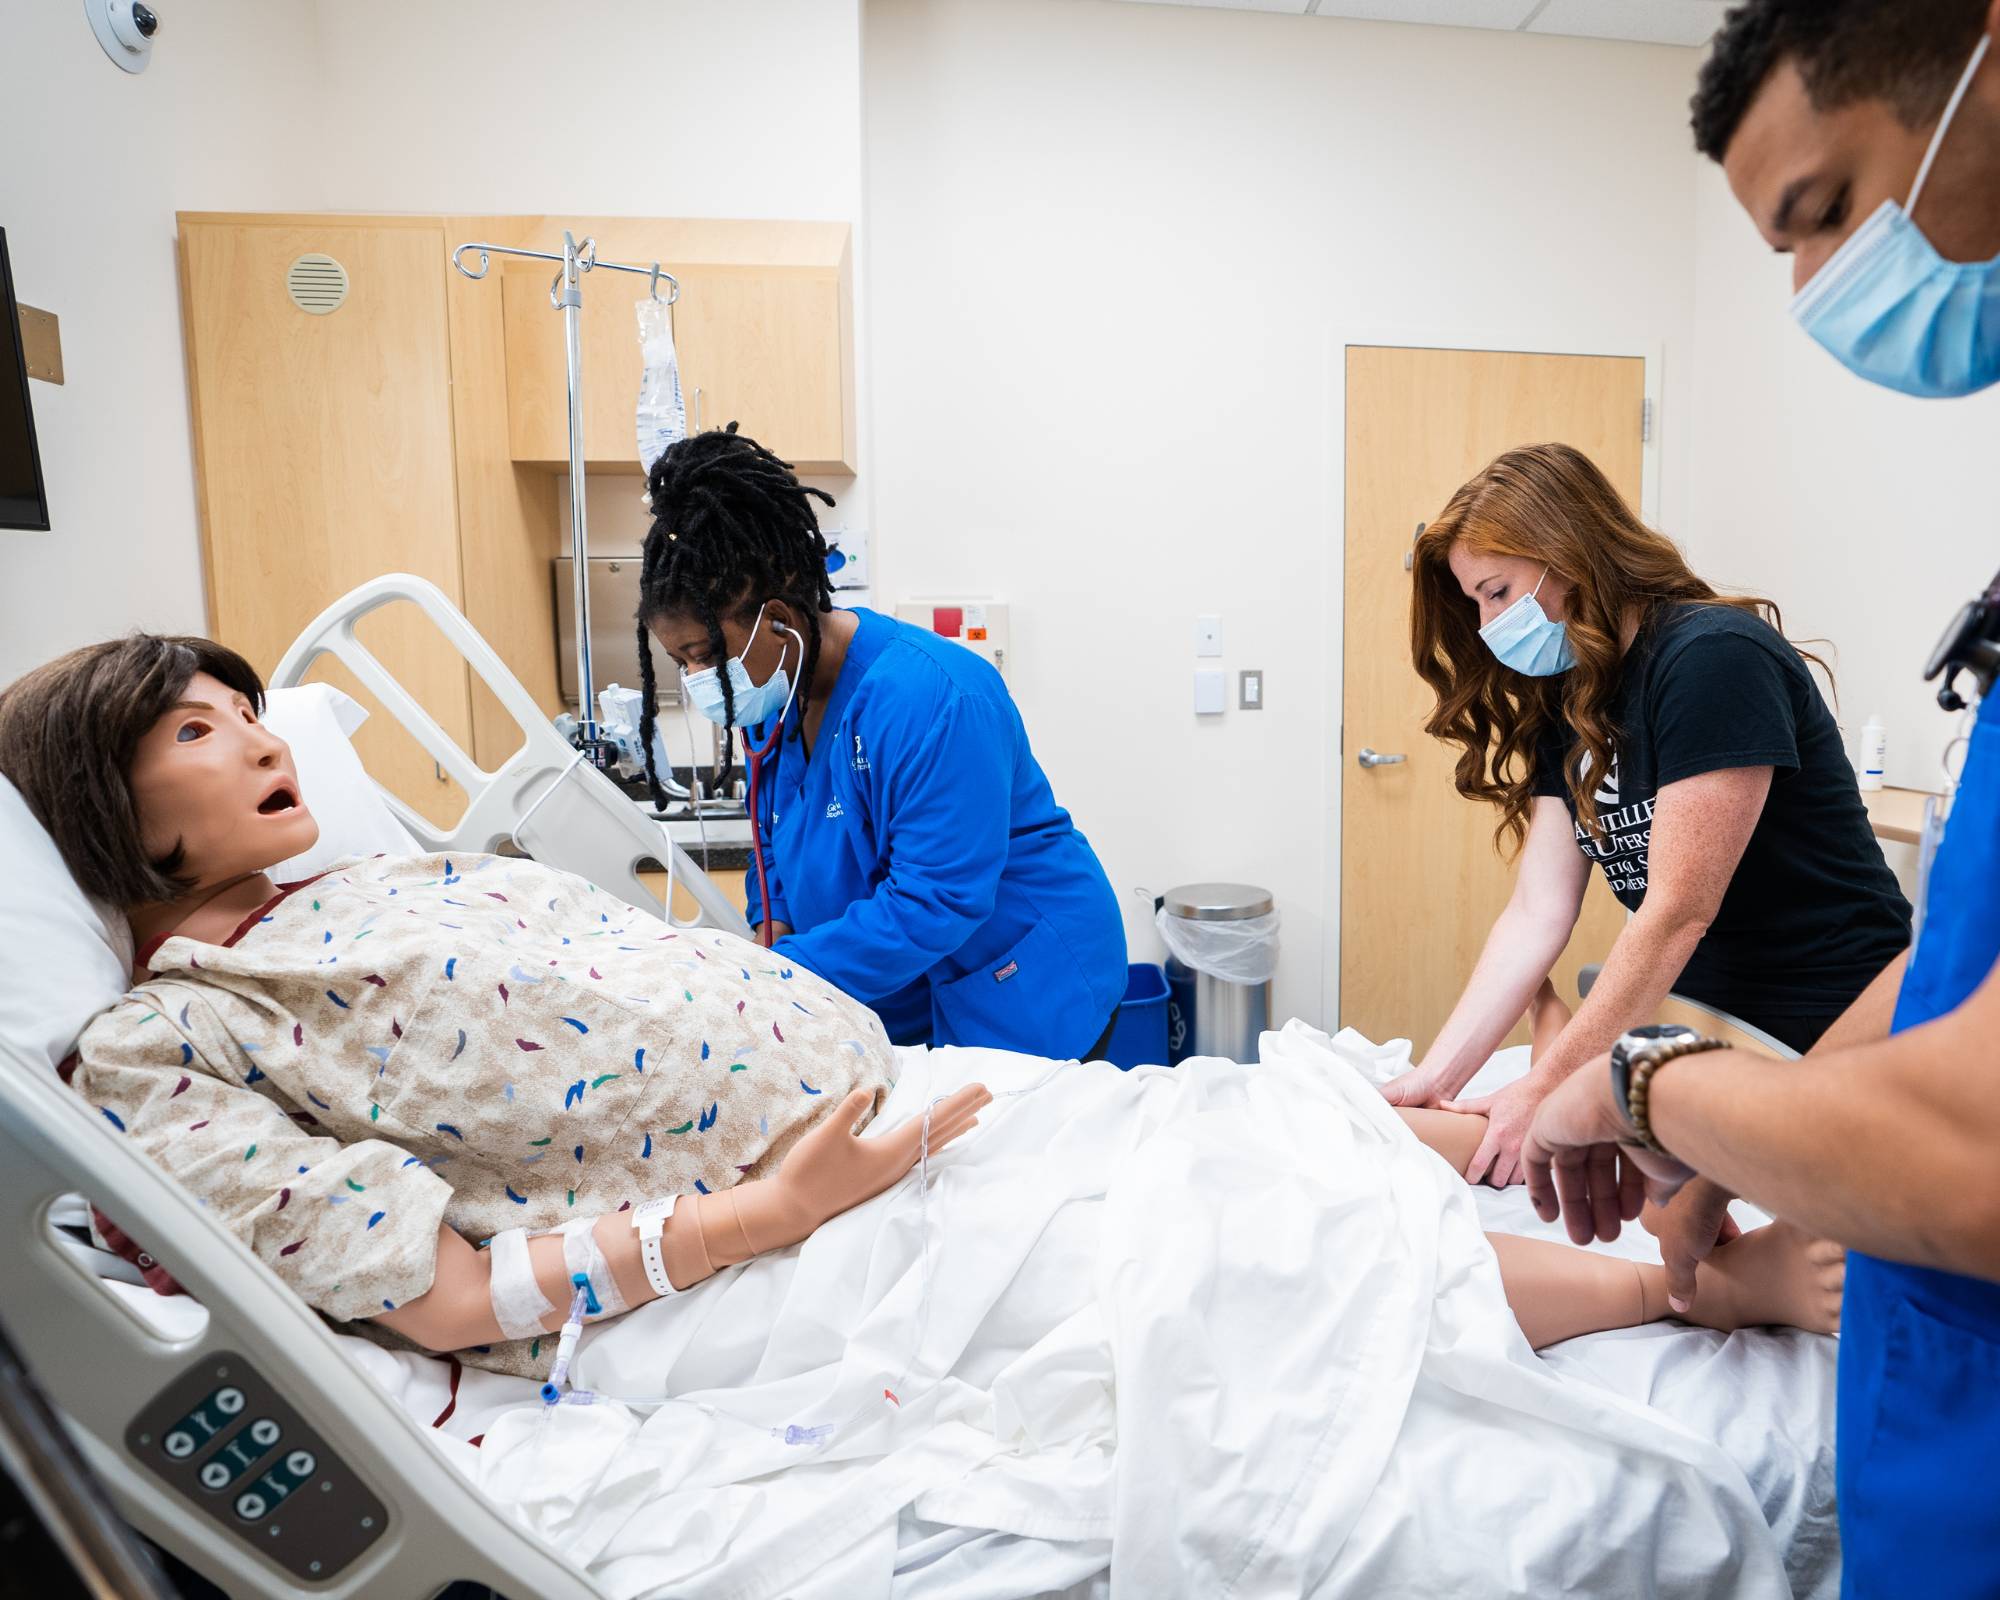 Medical students work with a patient simulation